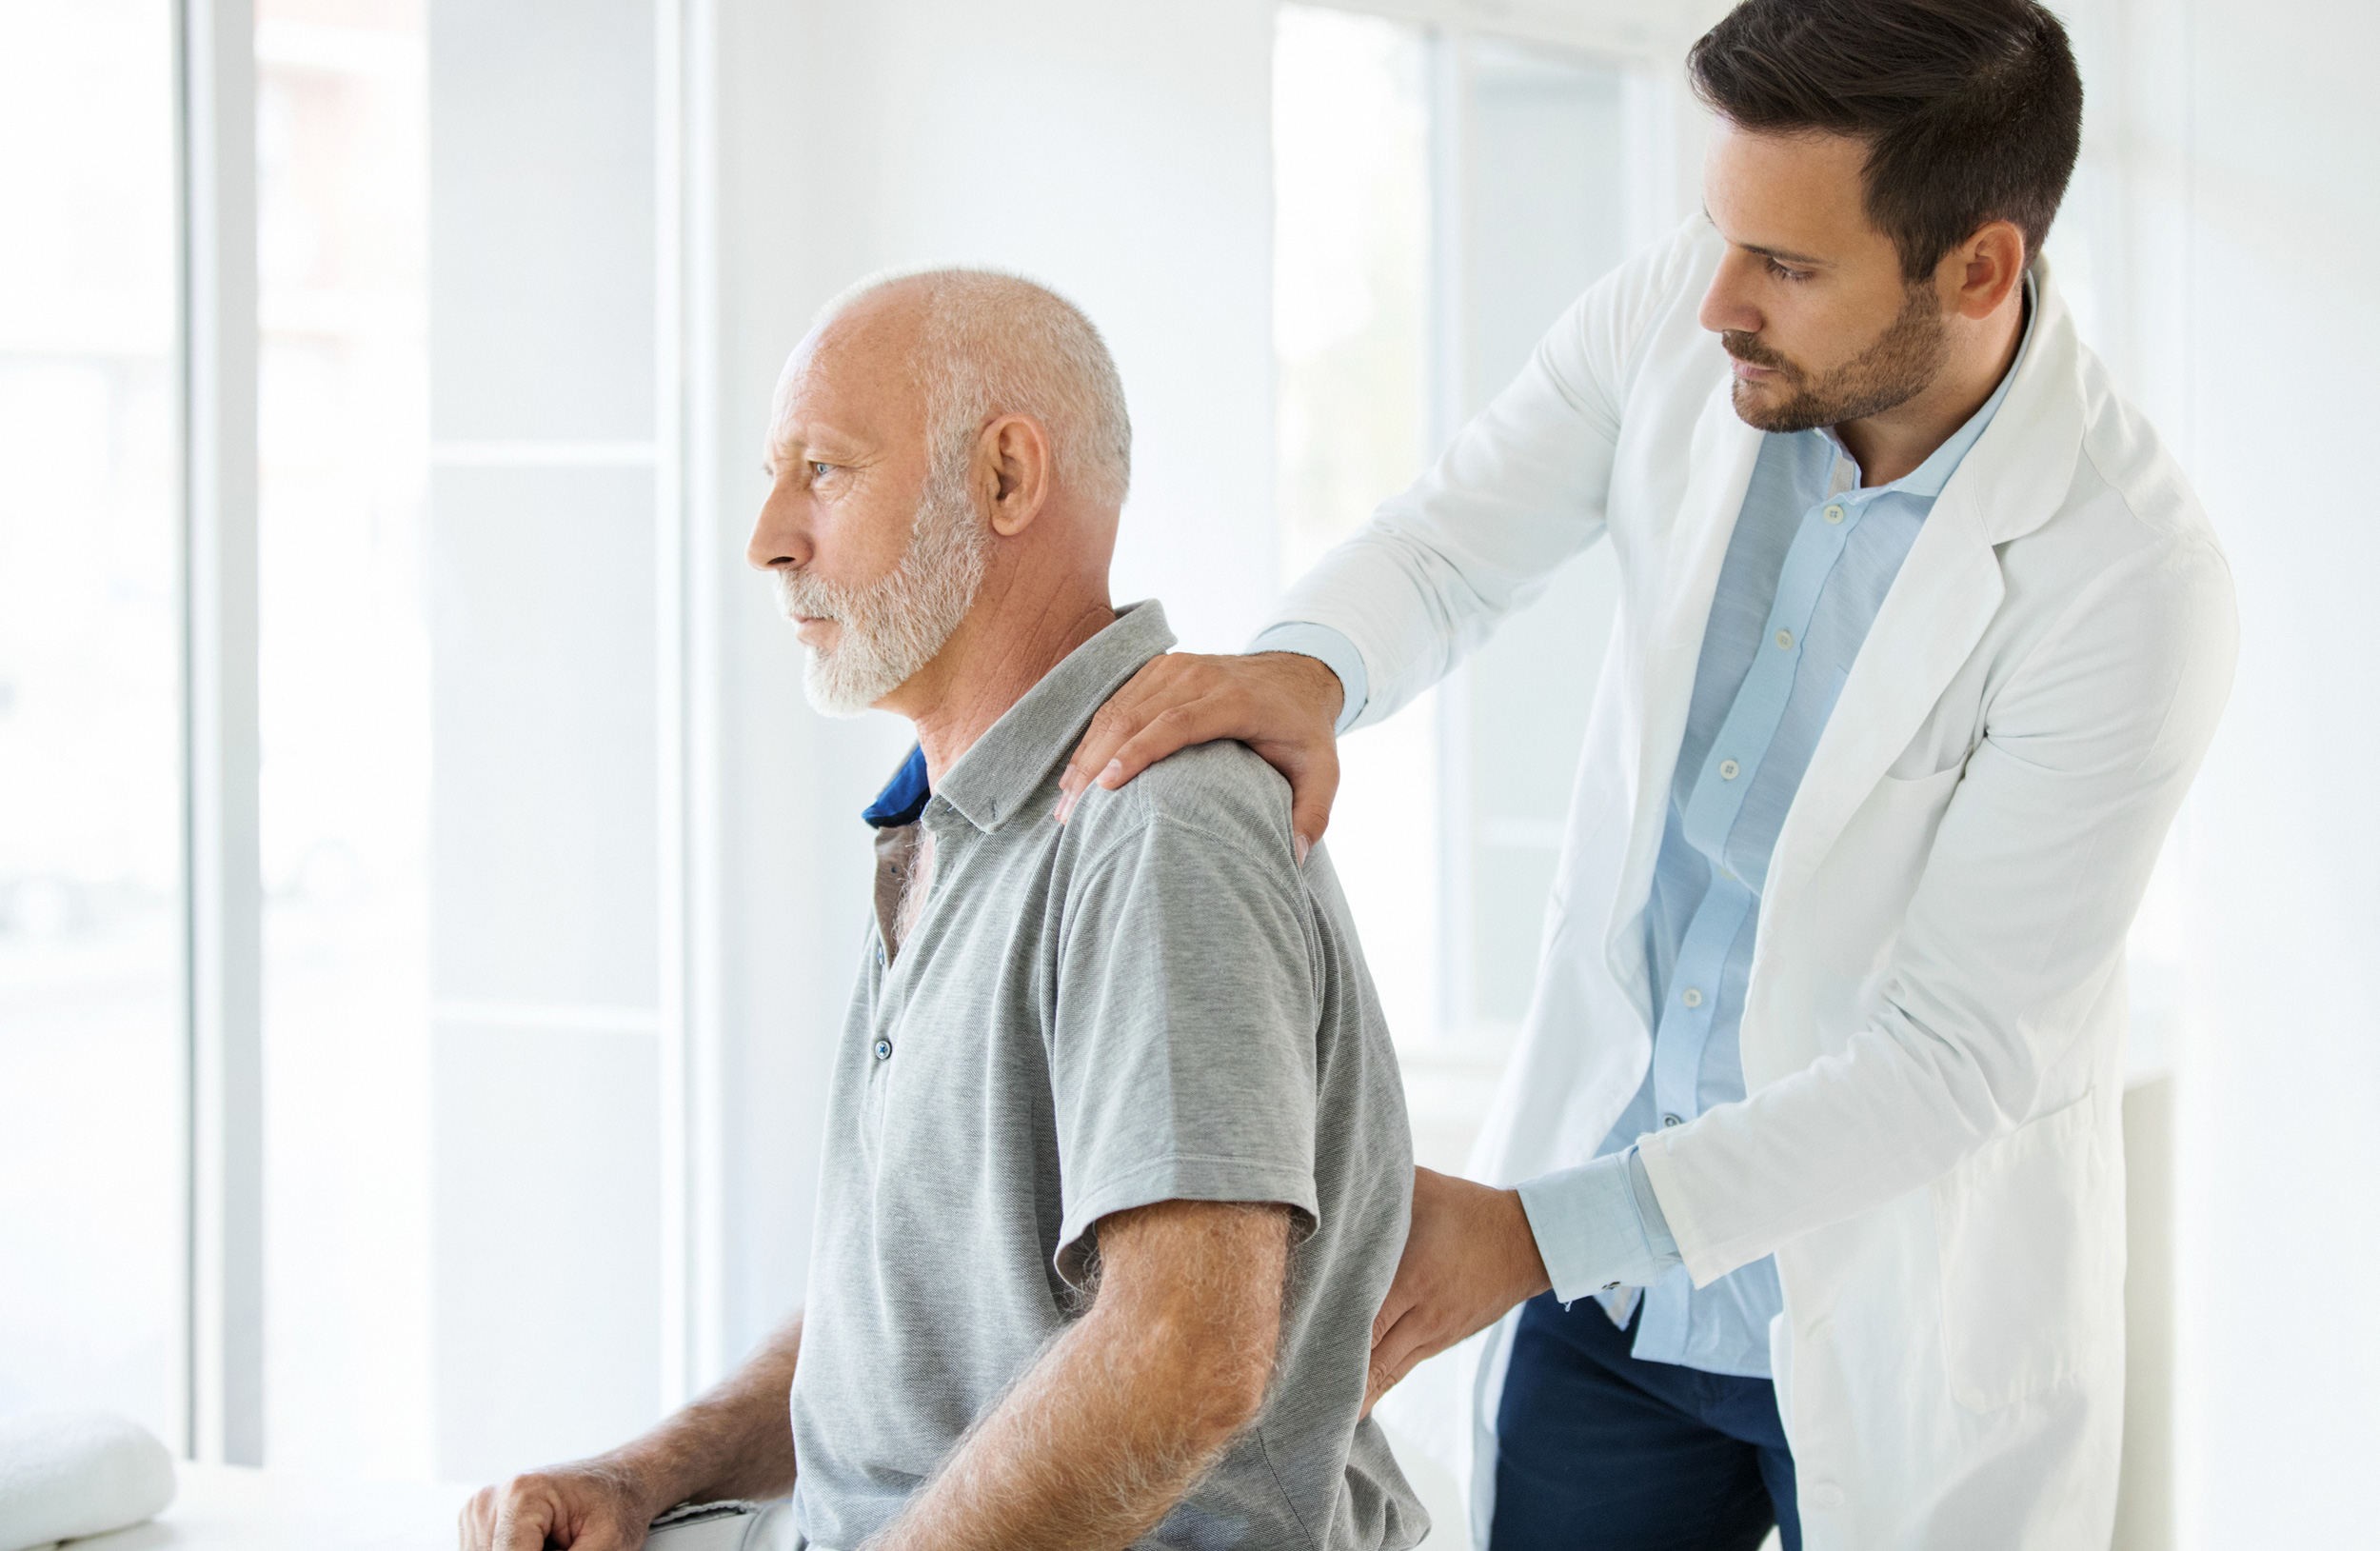 A doctor examines a man by holding his shoulder and pressing on his back with the other hand. The Oklahoma disability attorneys at Troutman & Troutman often see people with conditions like back pain, joint problems, arthritis and more getting approved for disability benefits.